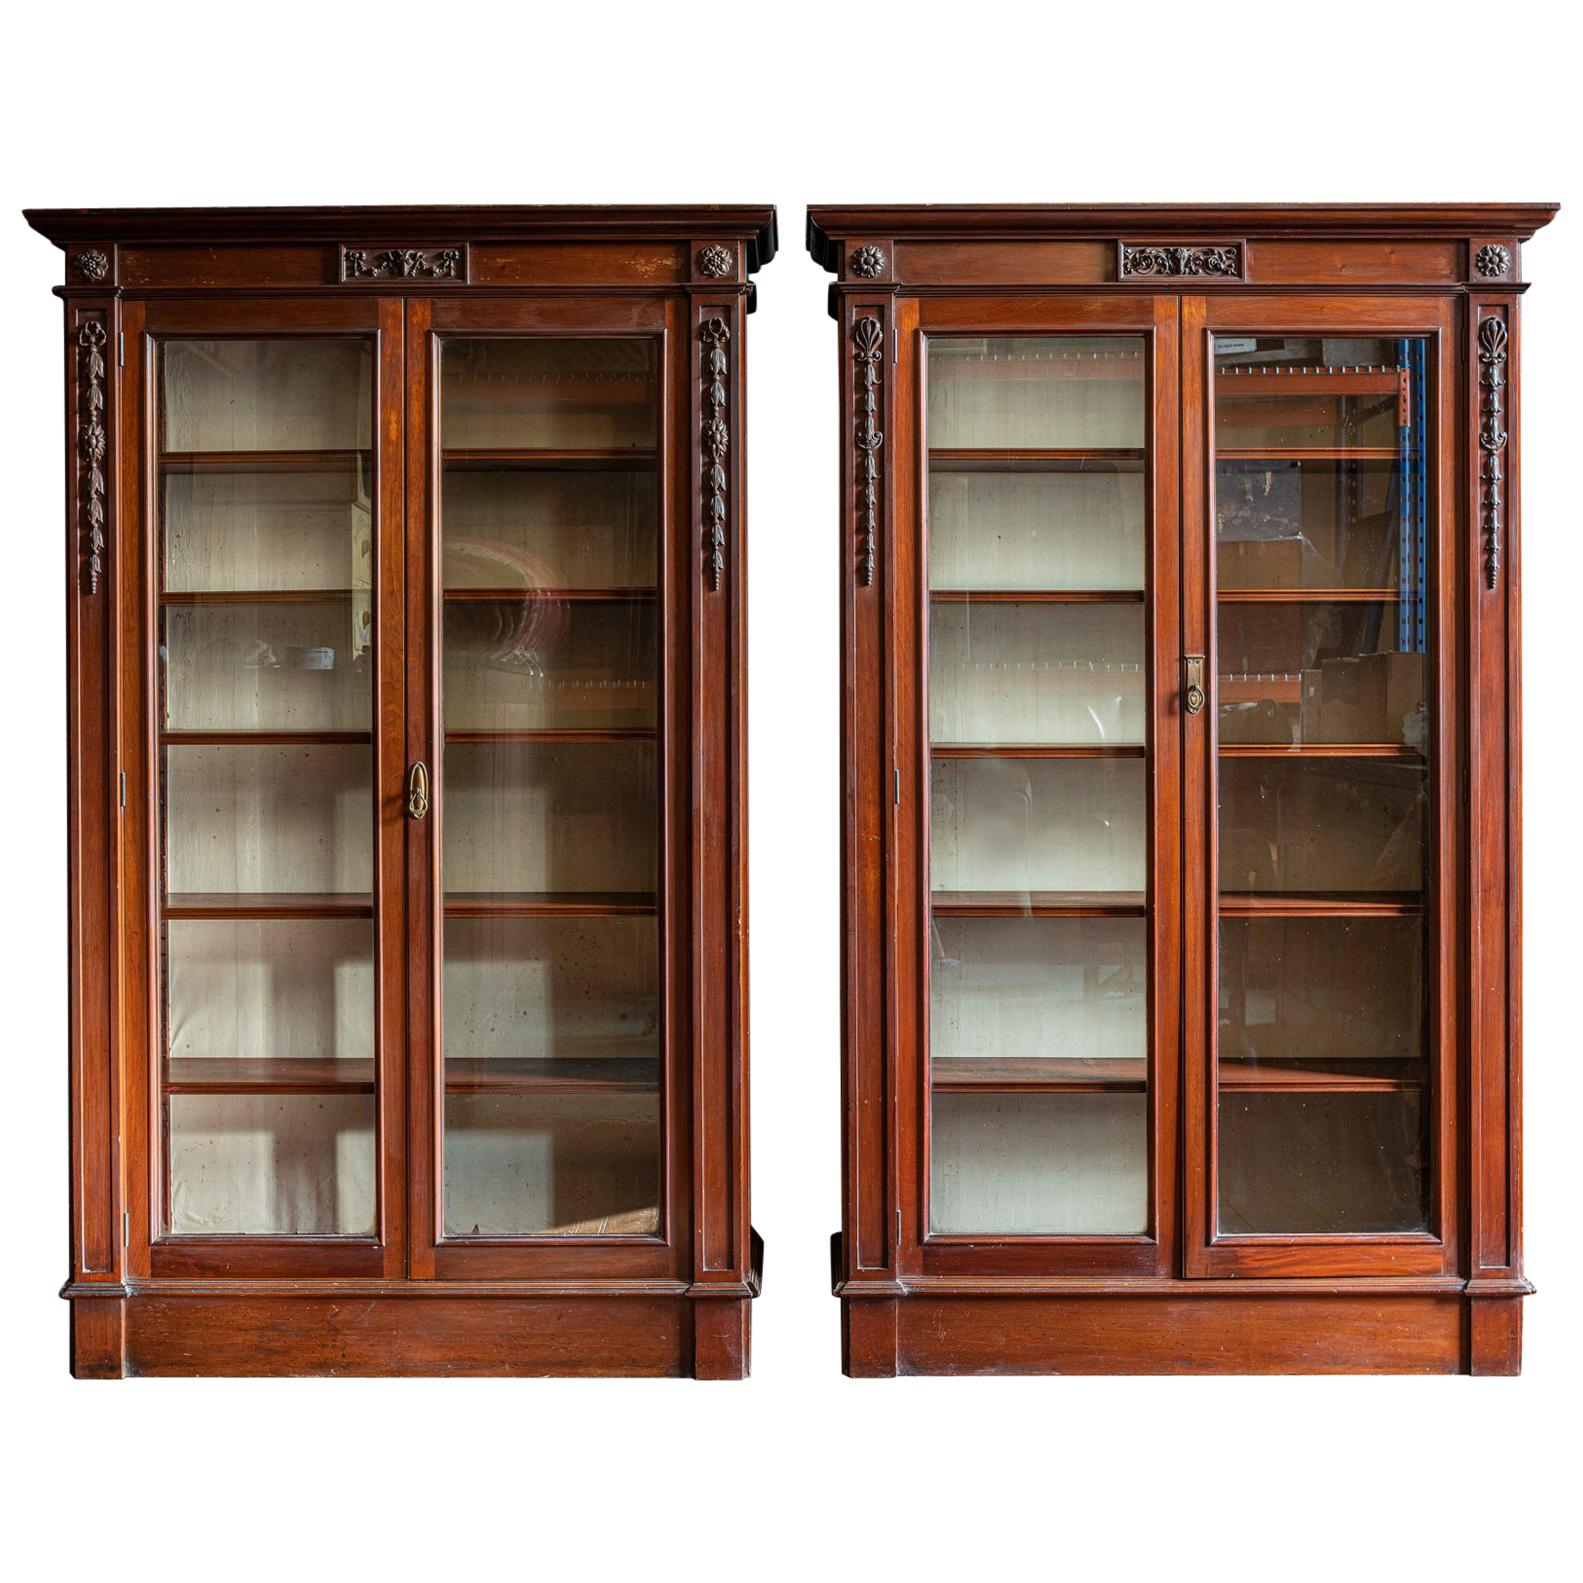 Pair of English Country House Solid Mahogany Glazed Bookcases